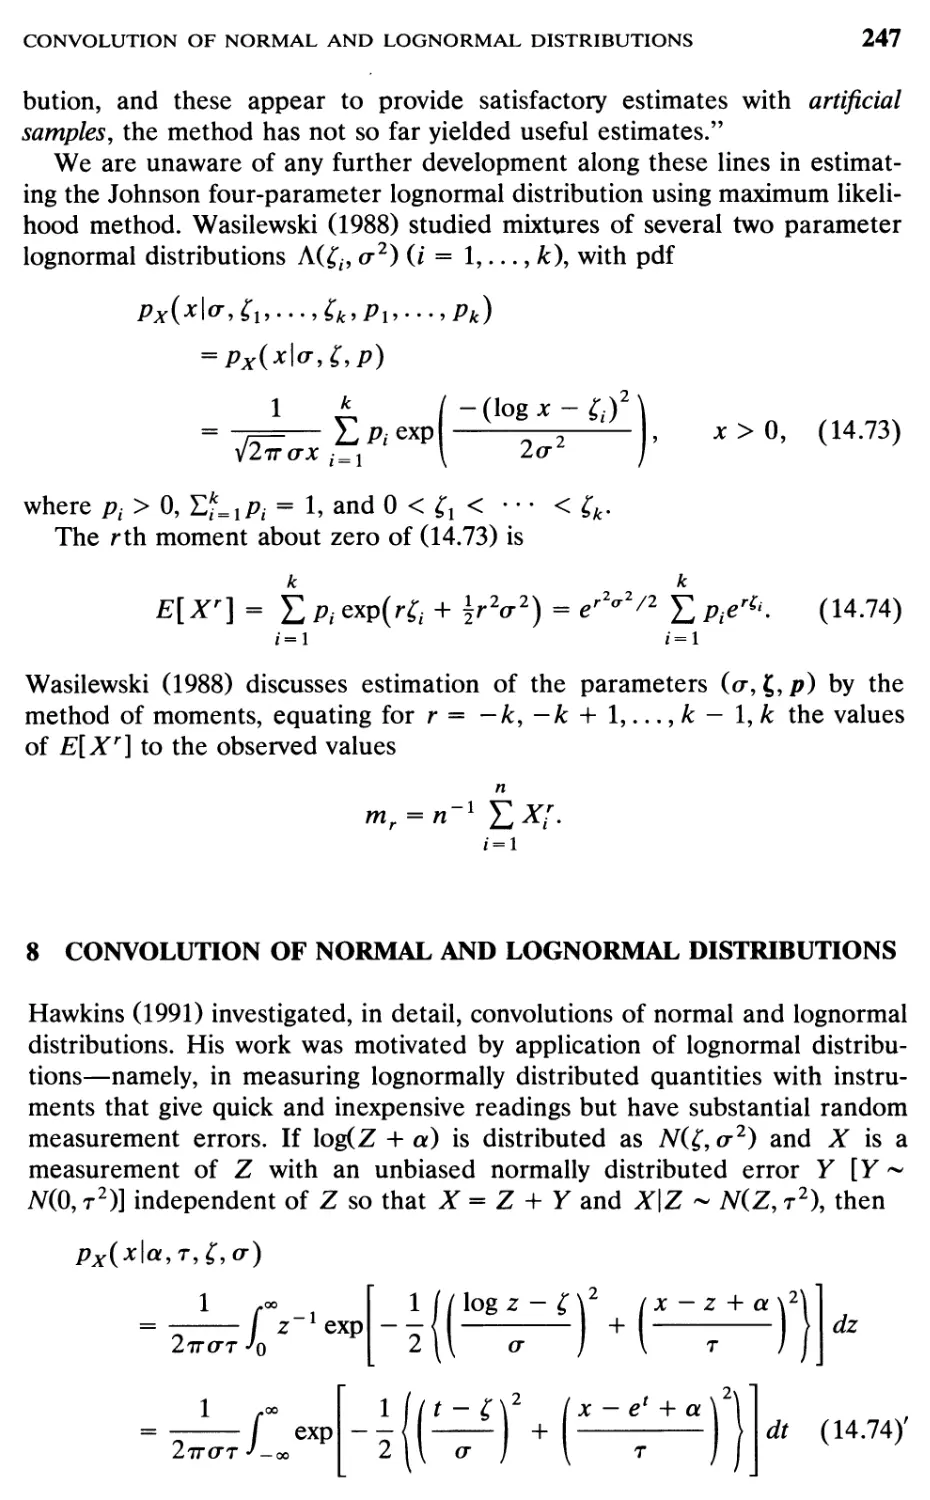 8 Convolution of Normal and Lognormal Distributions, 247